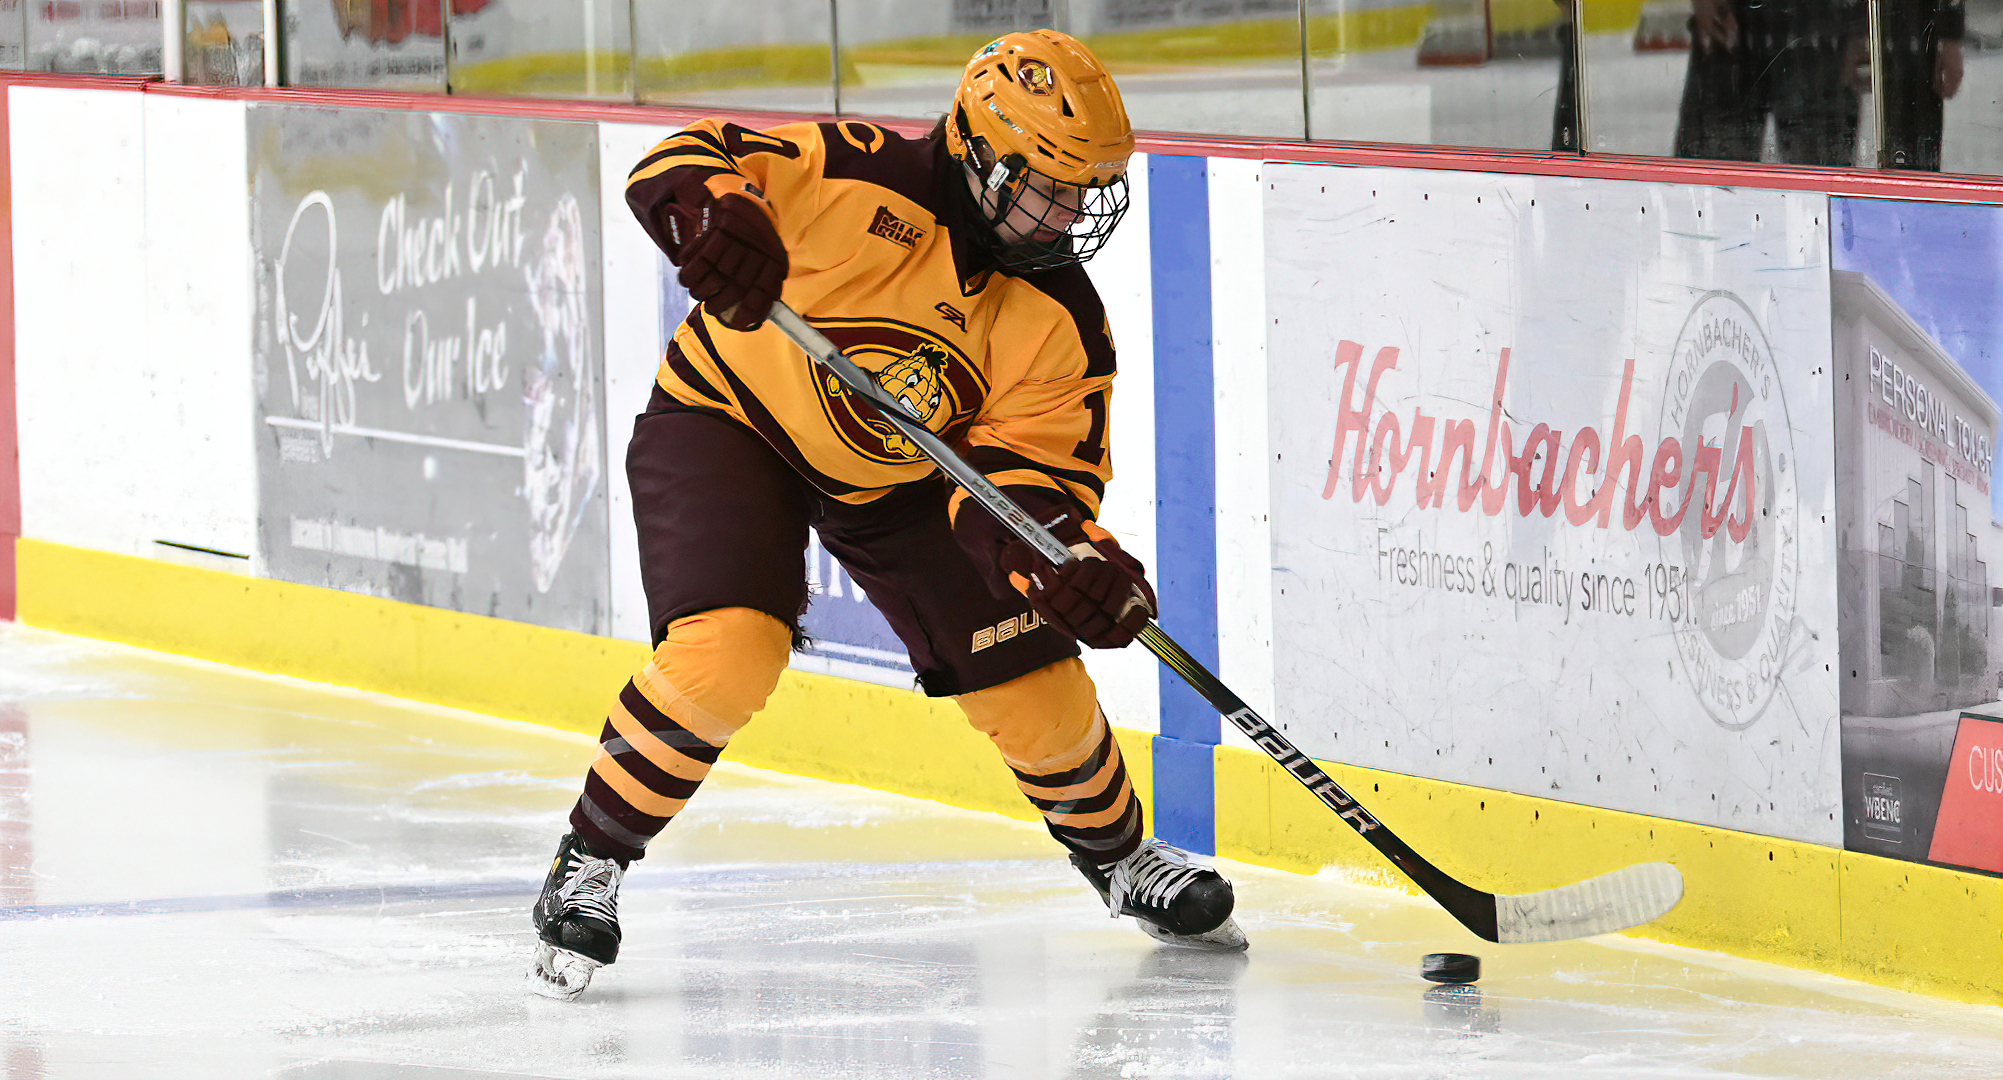 Lila Lanctot controls the puck before setting up the first goal in the Cobbers' game with Hamline. She scored her first college goal later in the game.